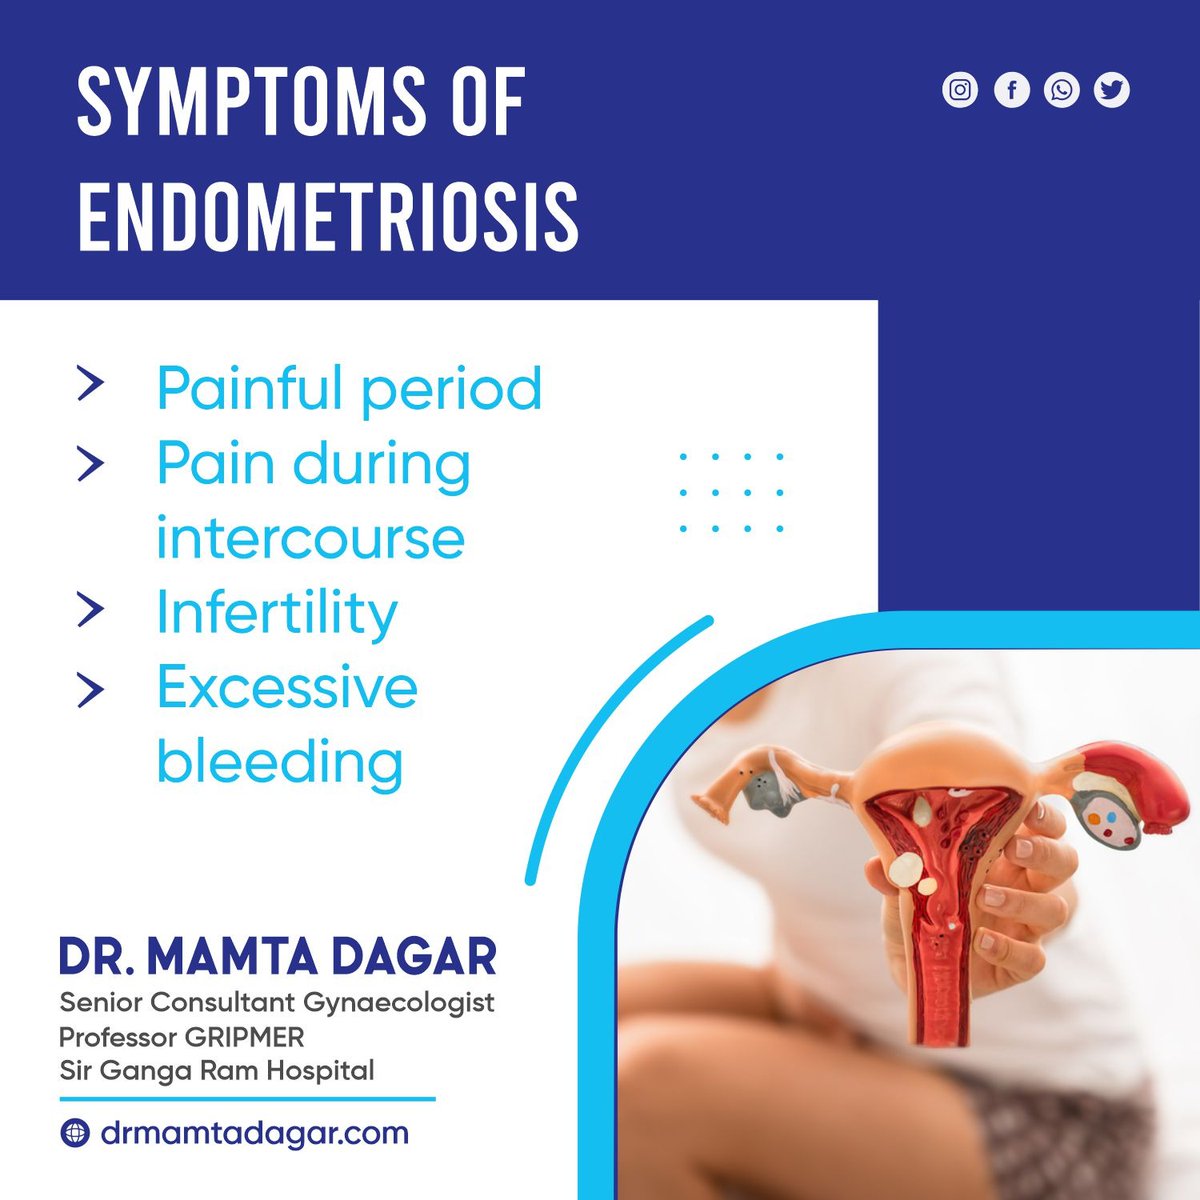 Endometriosis is an often painful condition where the endometrium, which is the uterus tissue, is present outside the uterus too. 

#Painfulperiod #besttreatmentforendometriosis #endometriosistreatment #bestgynecologistinDelhi